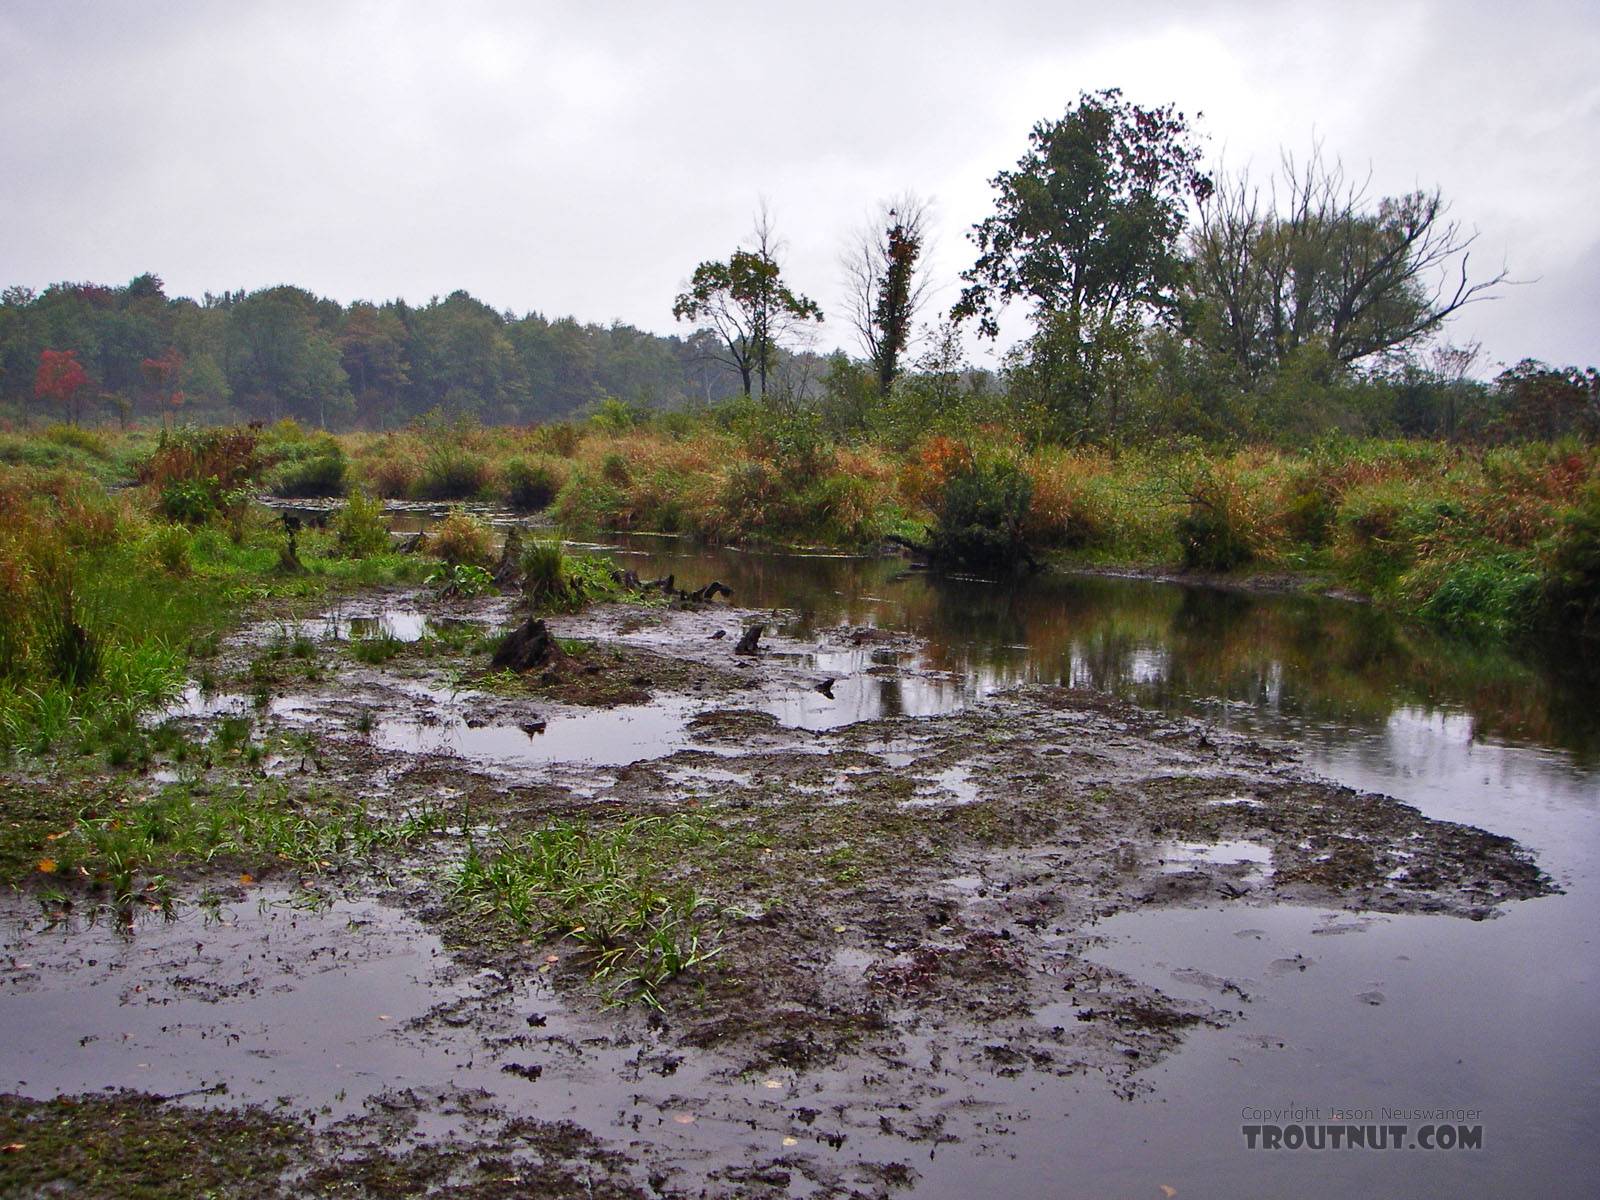 This seems to be a recently drained beaver pond in a swampy stretch of a trout stream. From Fall Creek in New York.